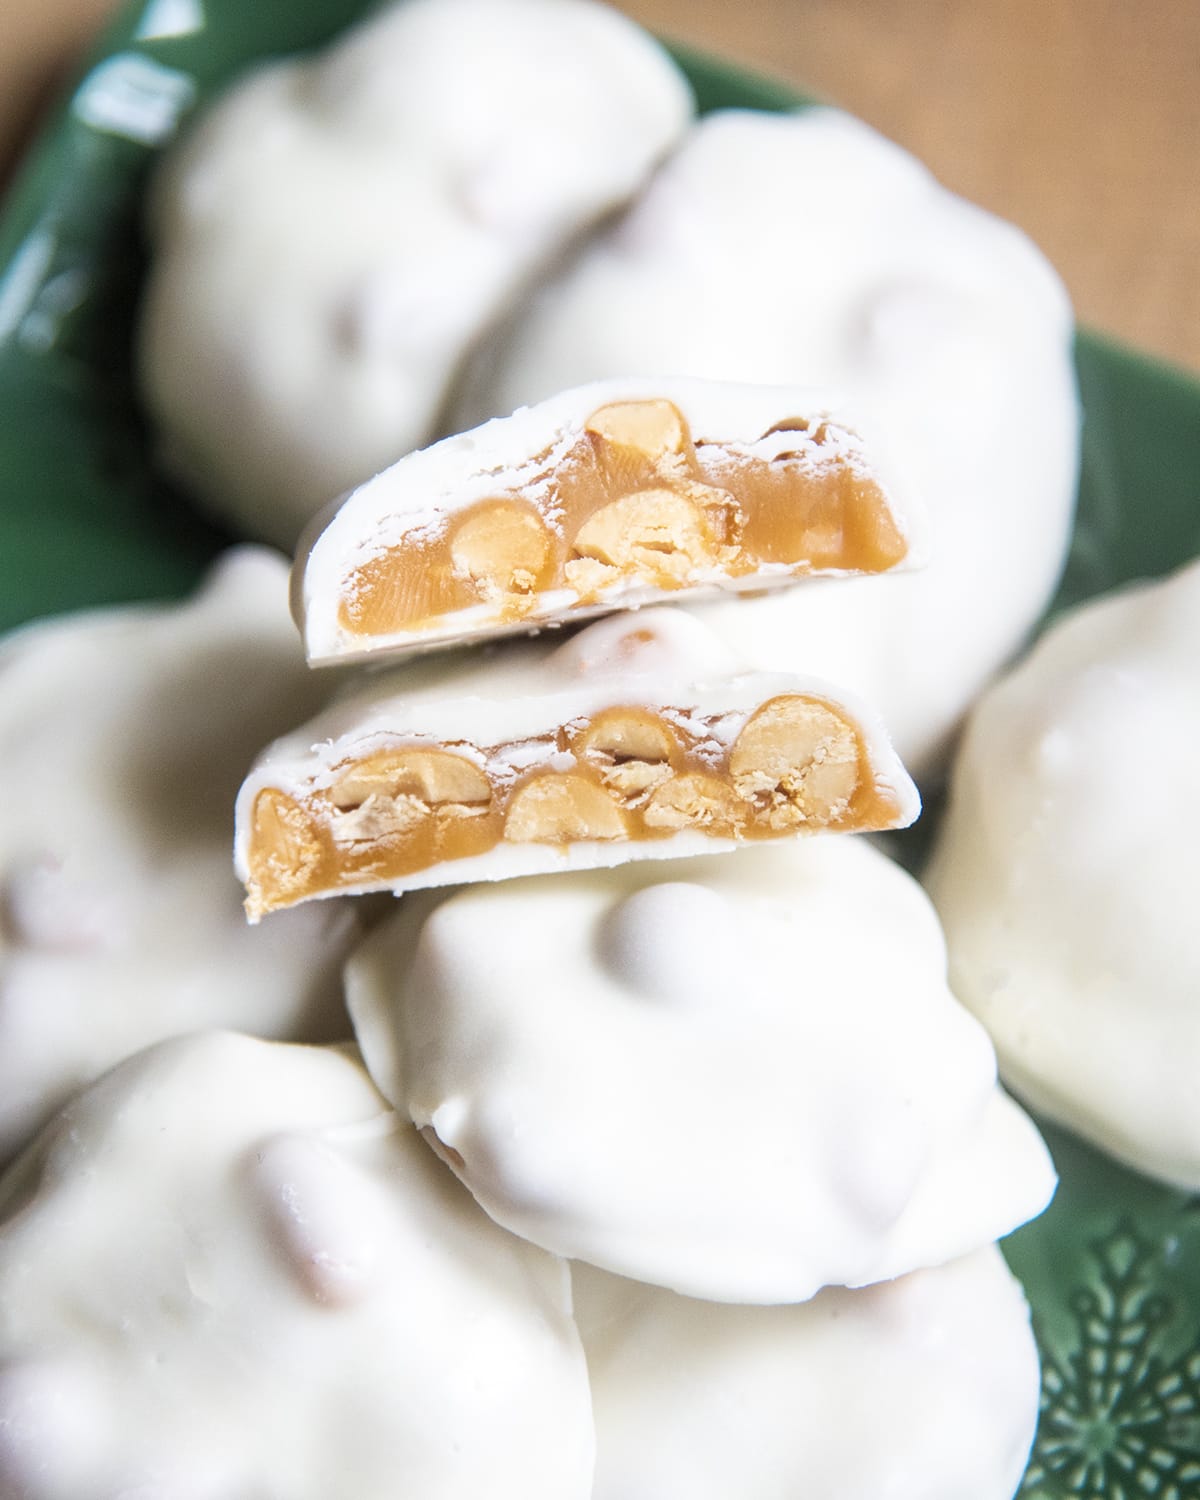 A caramel pecan cluster covered in white chocolate and cut in half showing the middle.